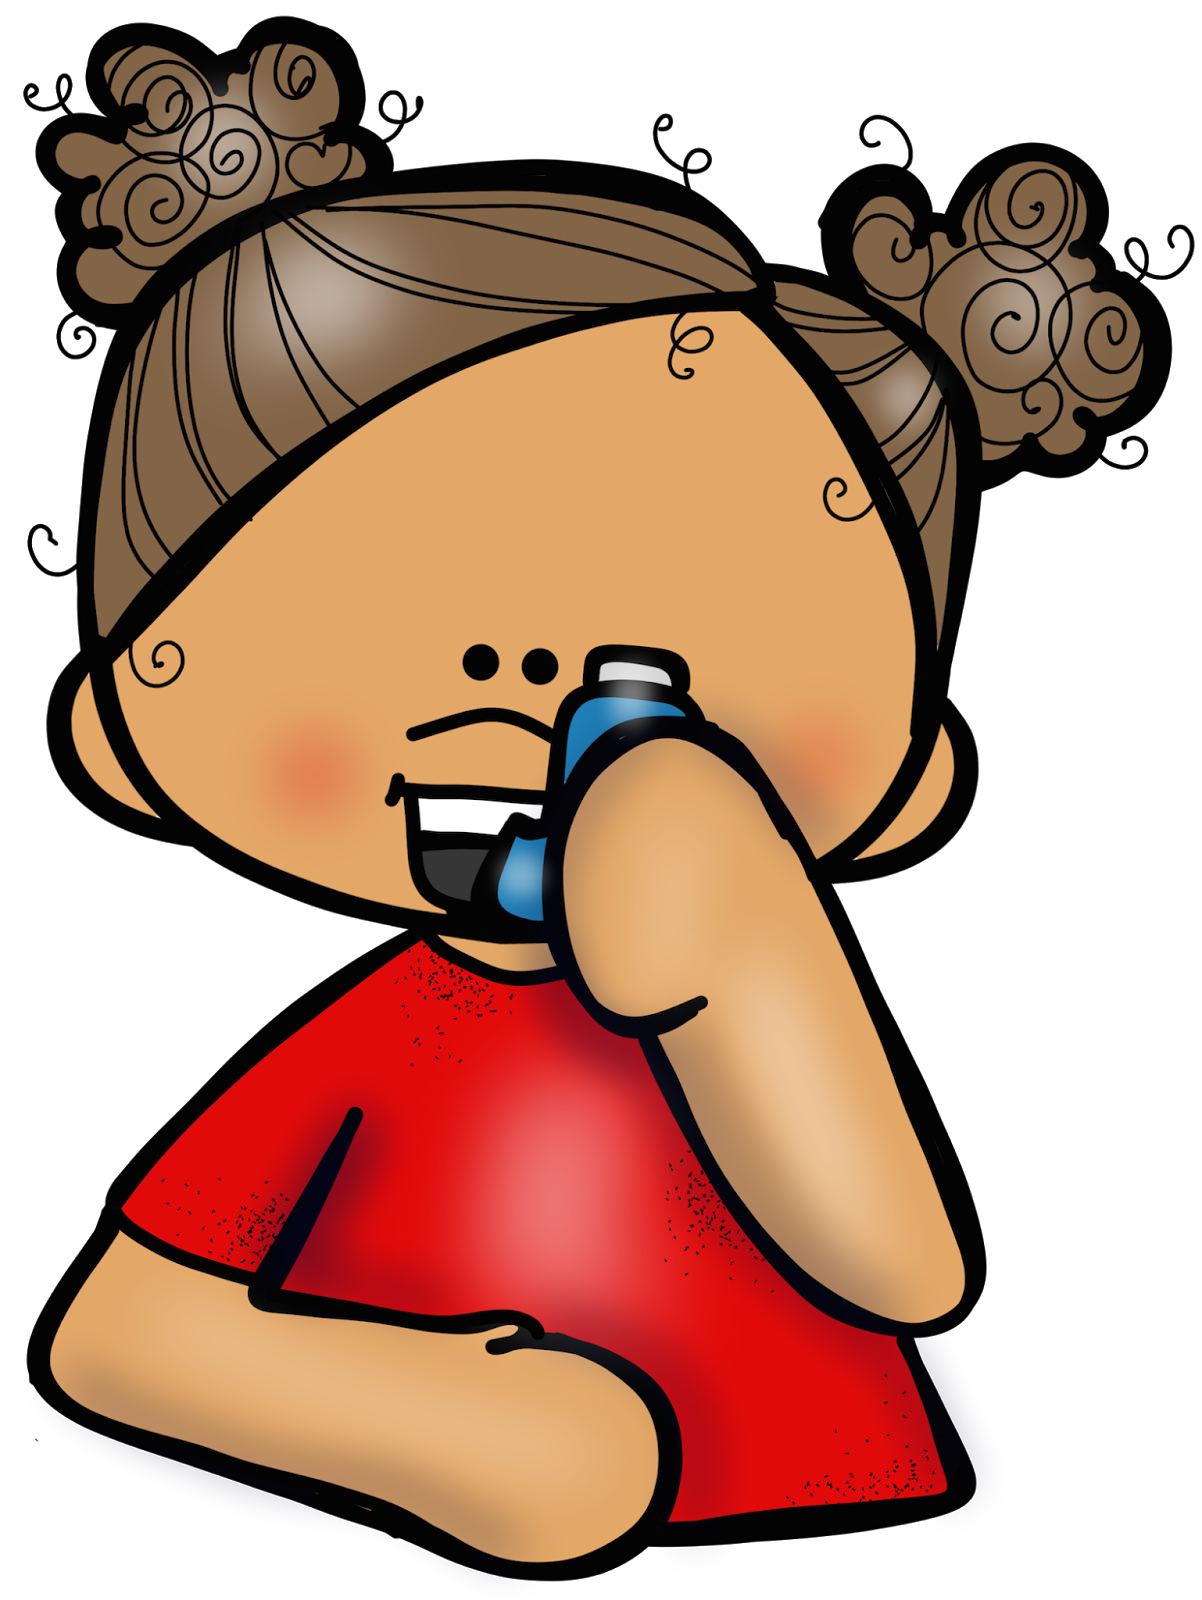 cough clipart asthma attack